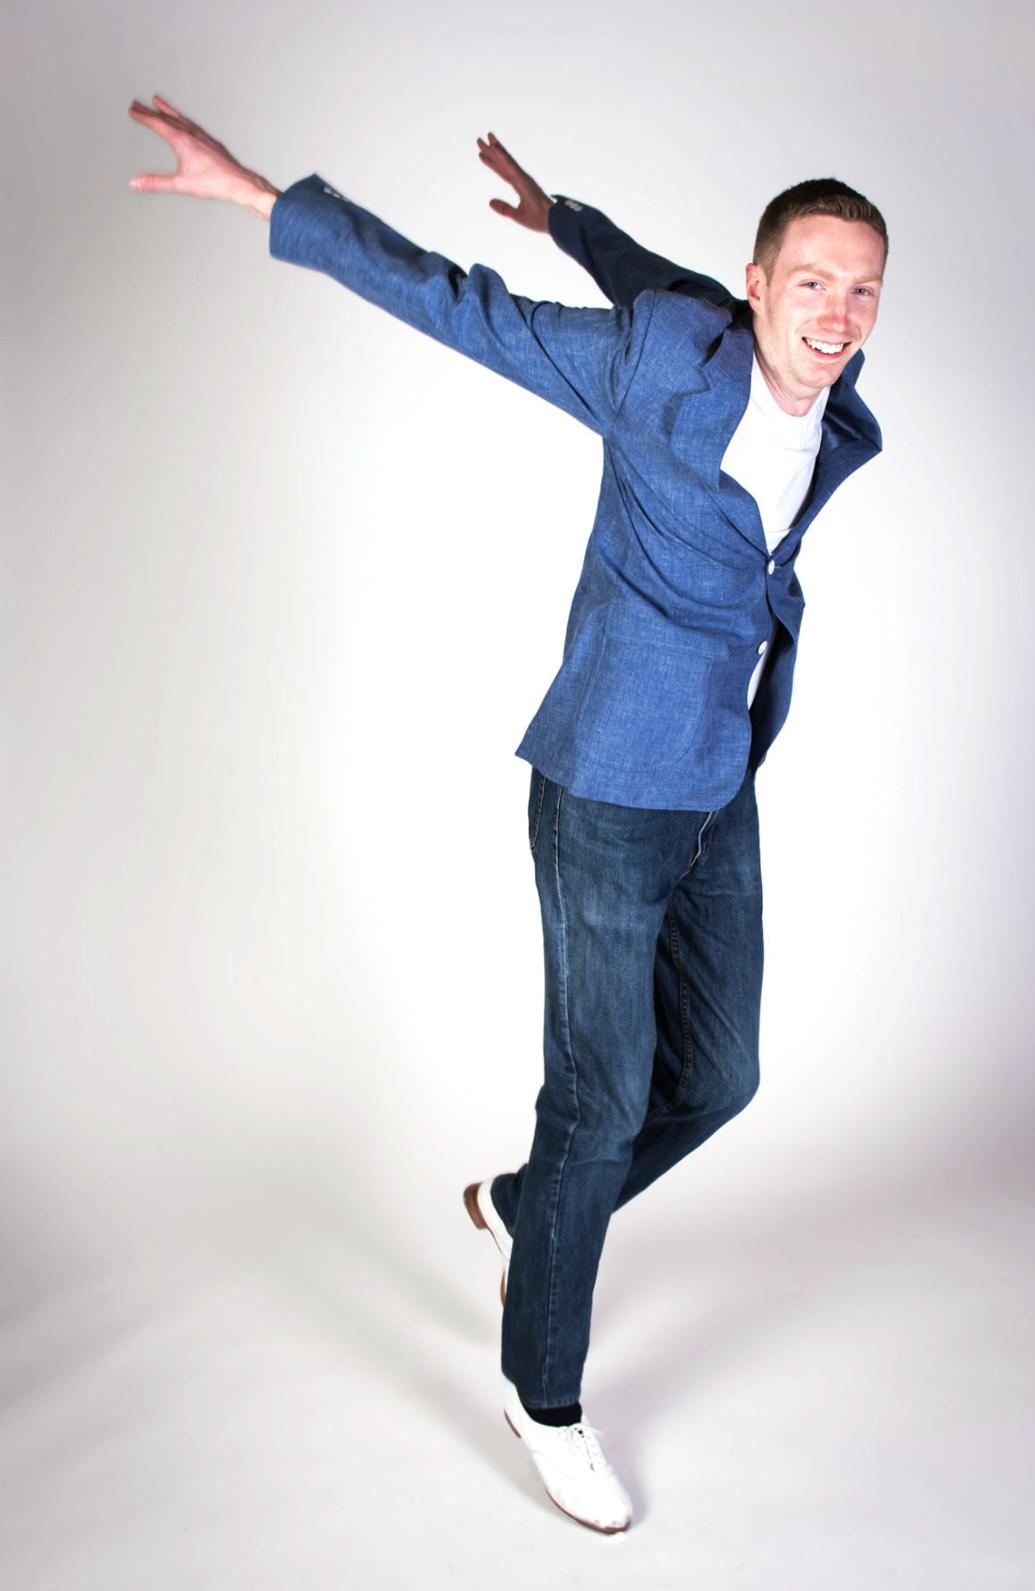 Tap Dancer Ryan Casey At Cotuit Center For The Arts | Arts ...